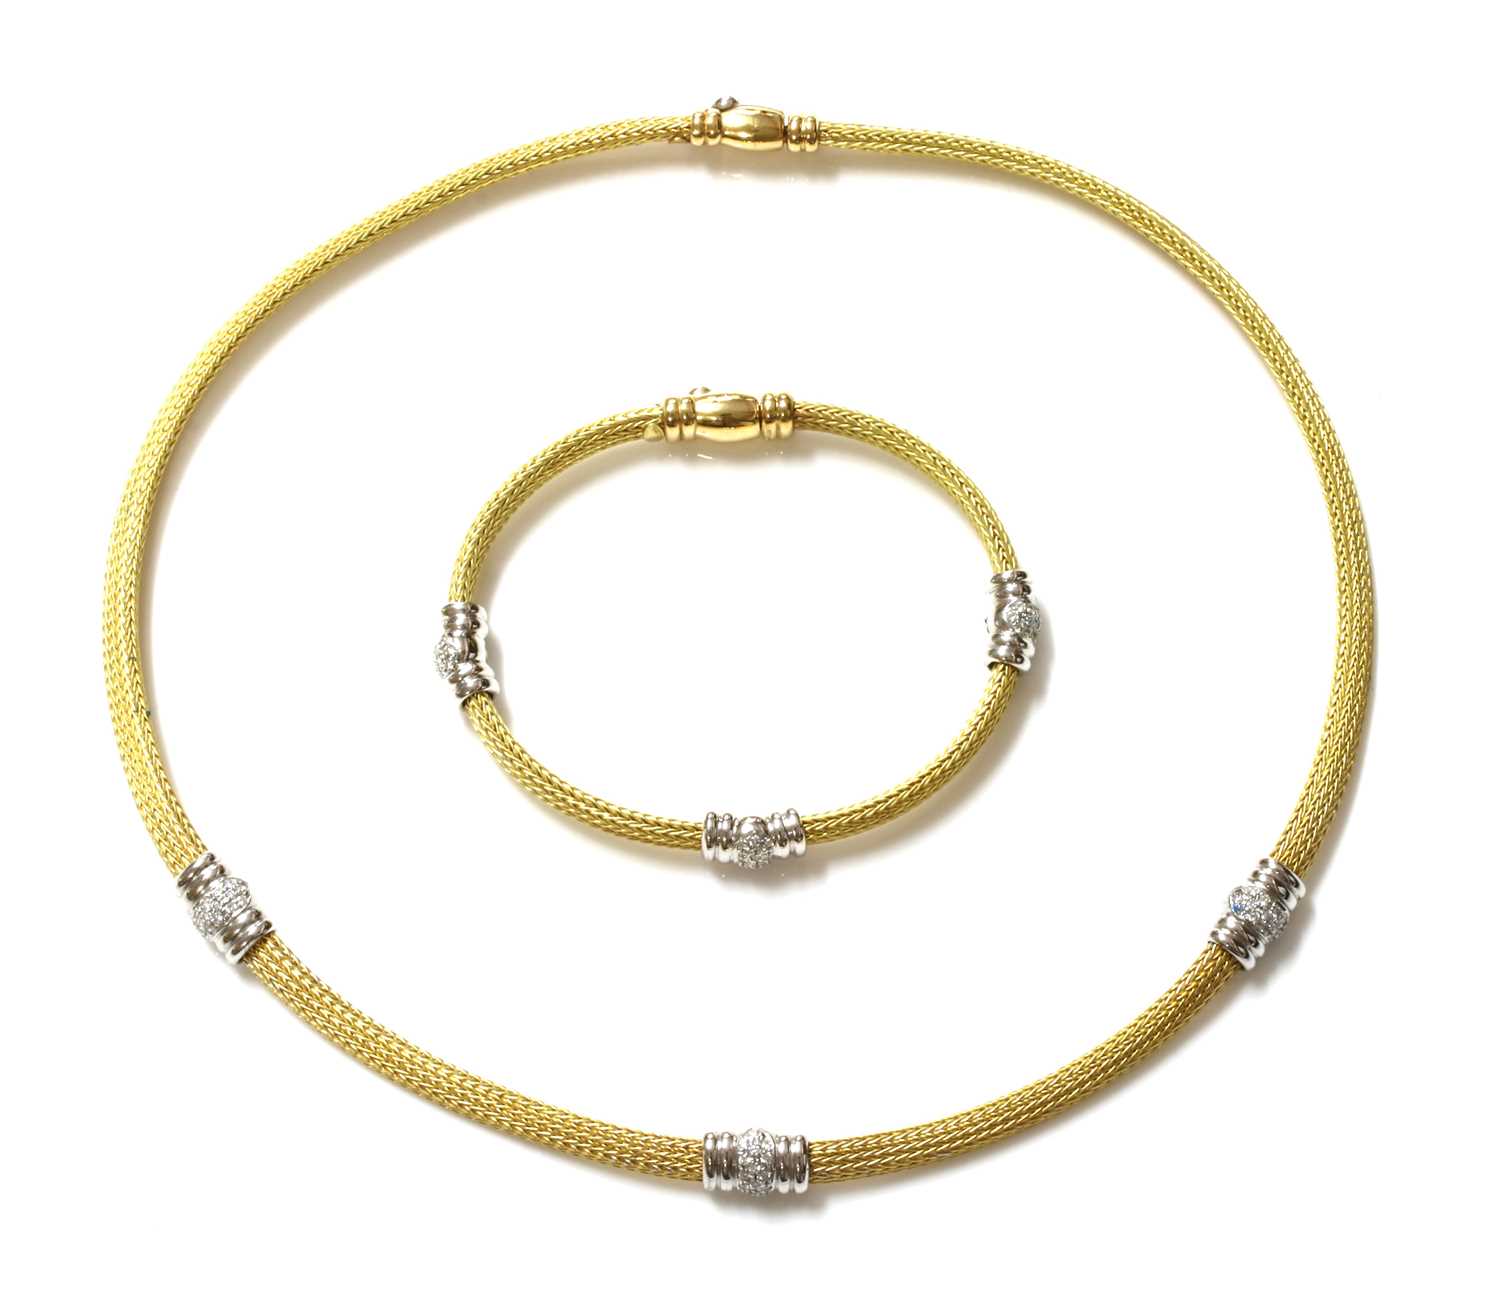 Lot 319 - An 18ct yellow and white gold diamond set necklace and bracelet suite, by Italian Lynx